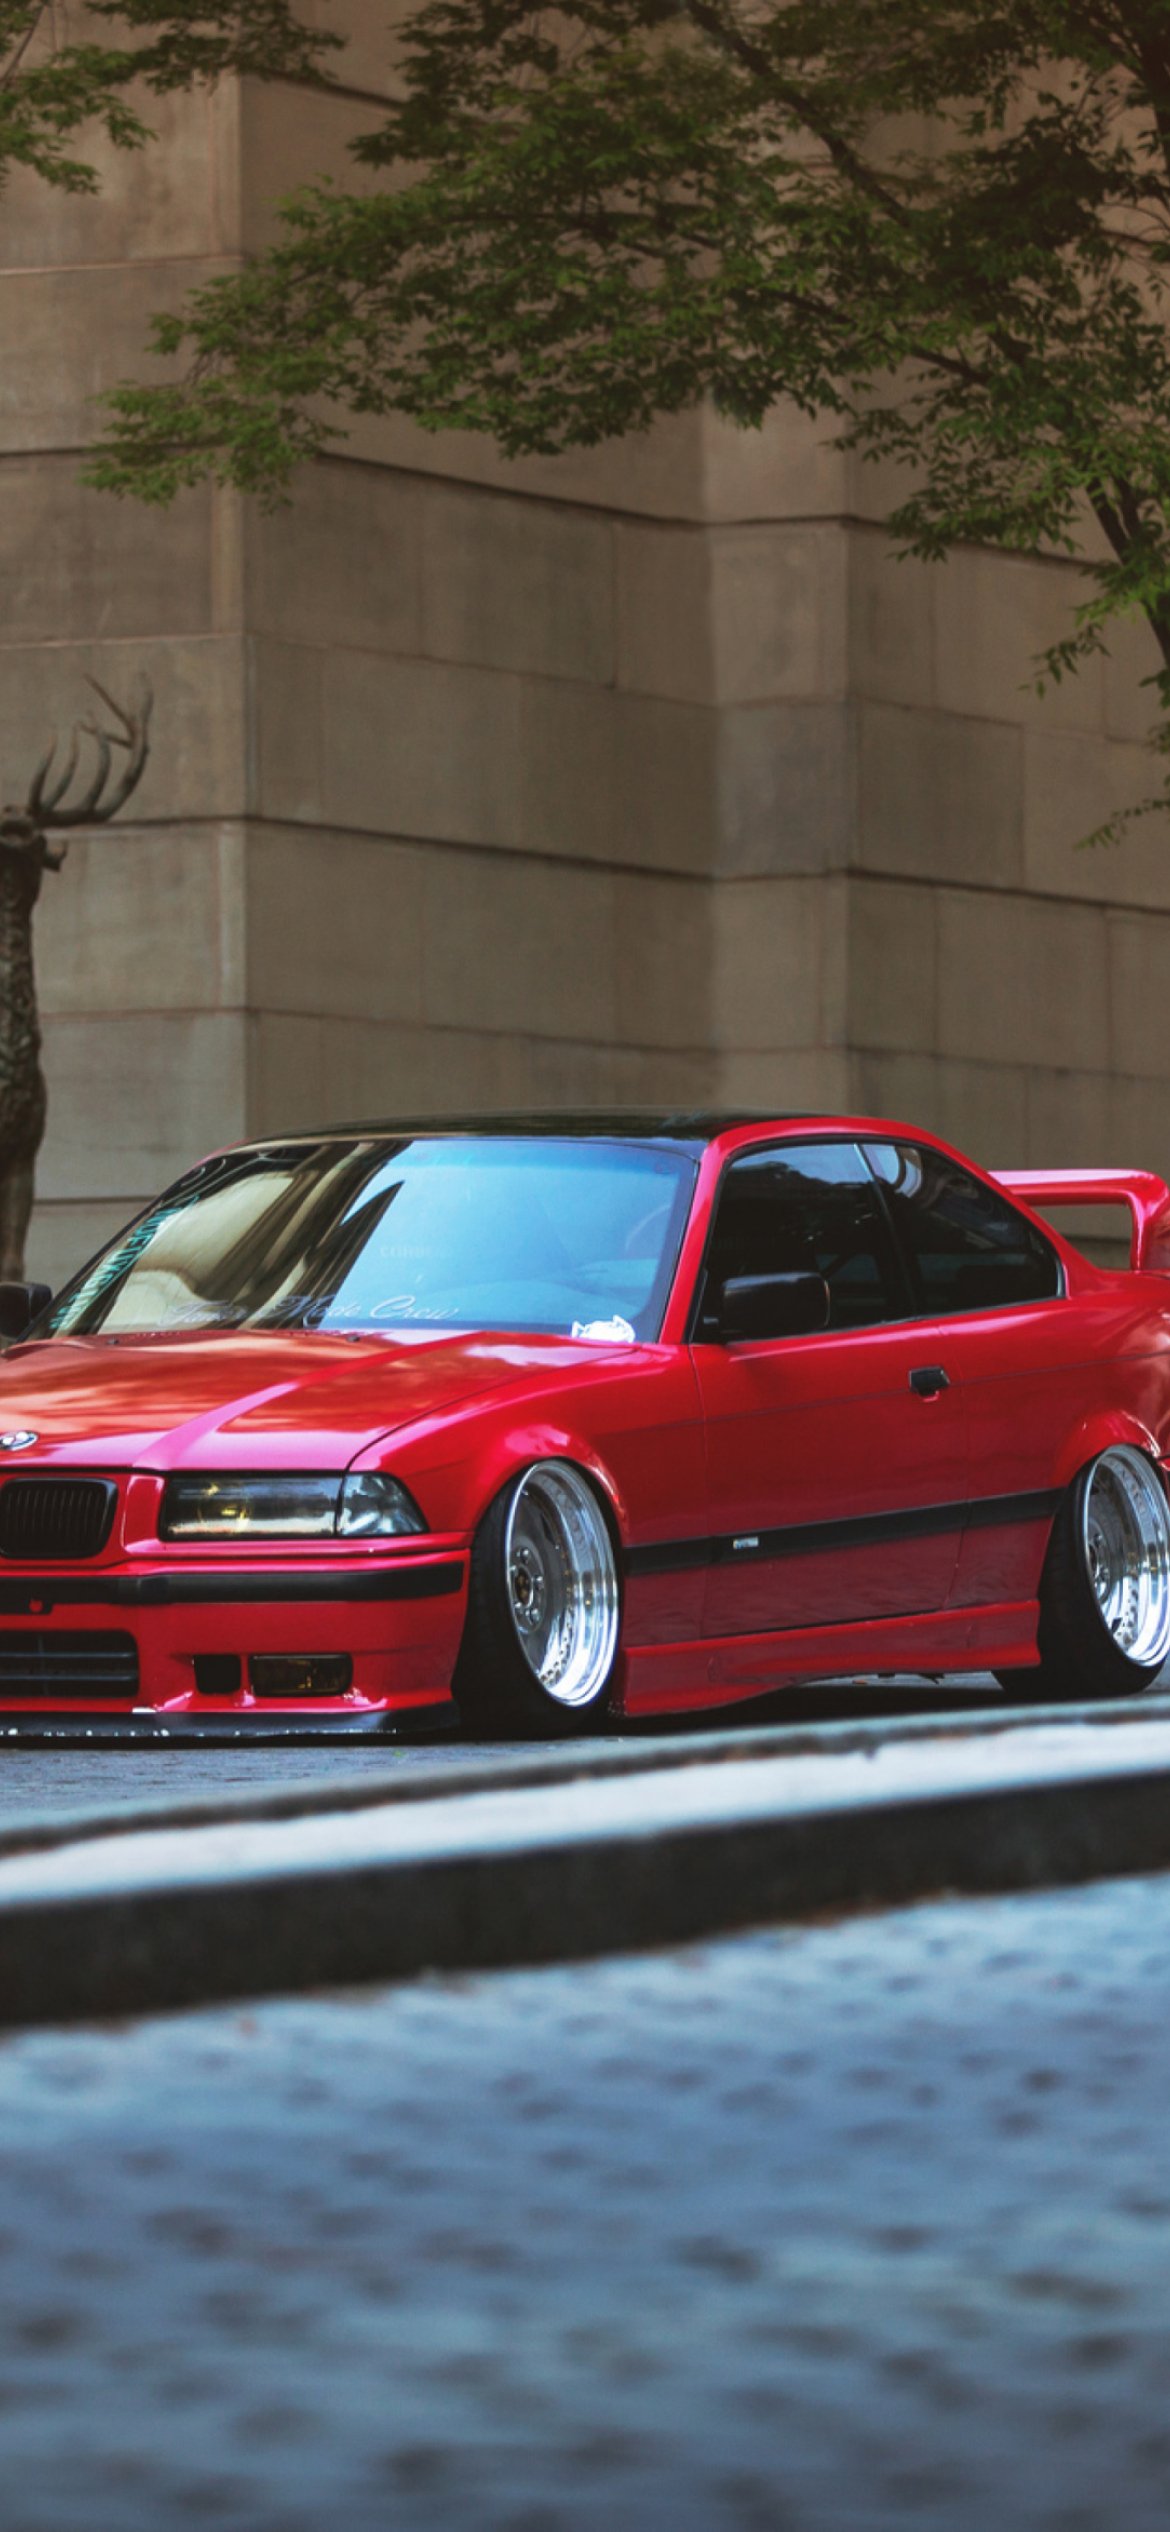 BMW E36 Wallpaper for iPhone 11